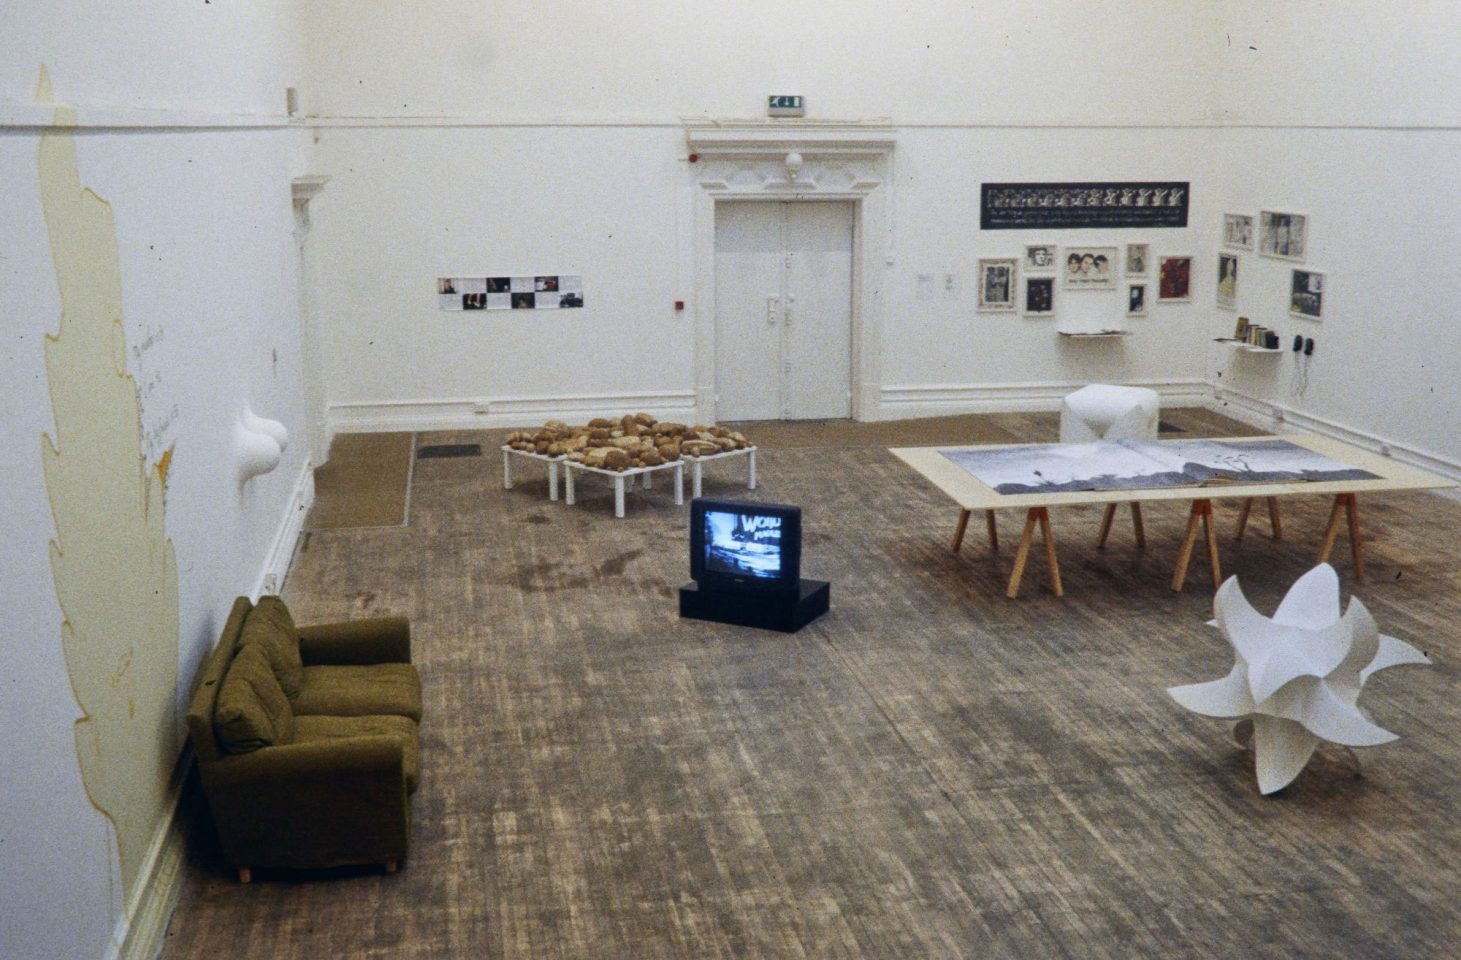 Installation view from 1998 group exhibition Lovecraft.
